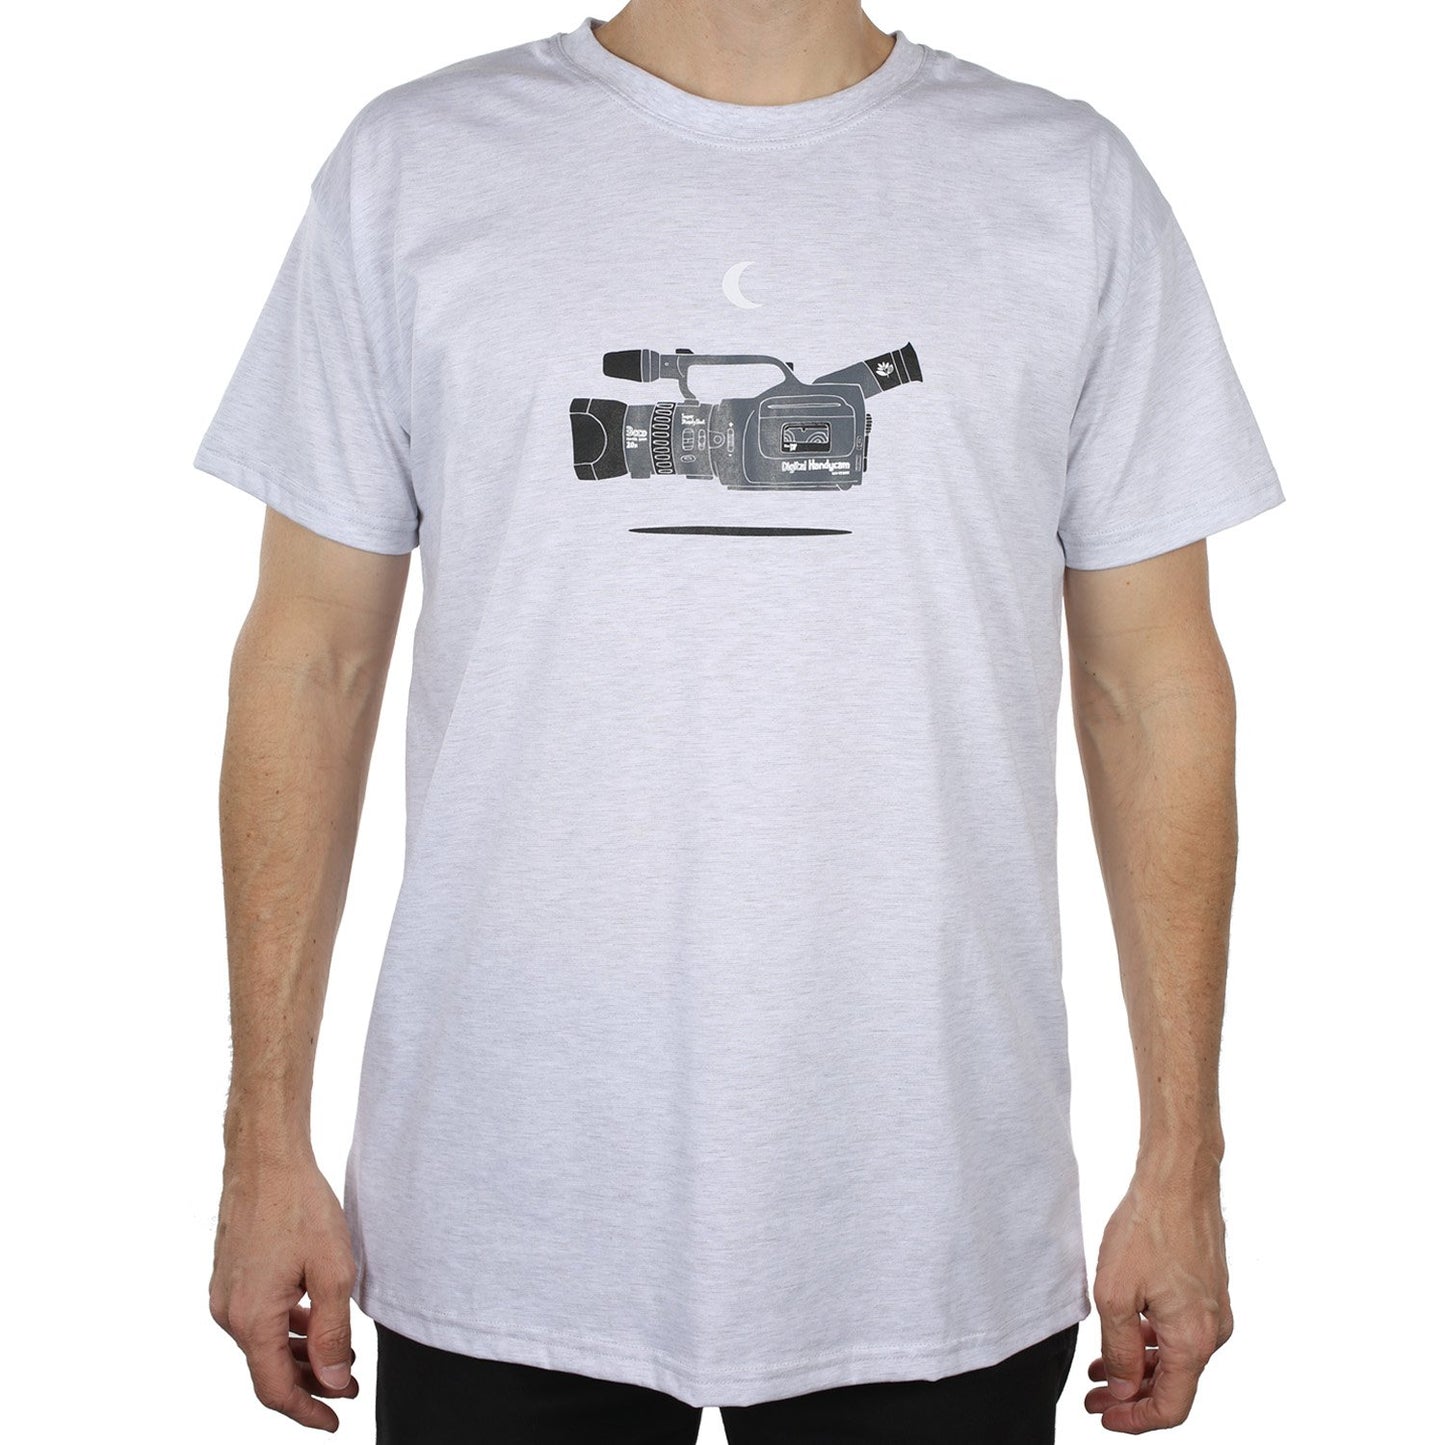 Vx S/S Tee Shirt Ash Gry (size options listed)